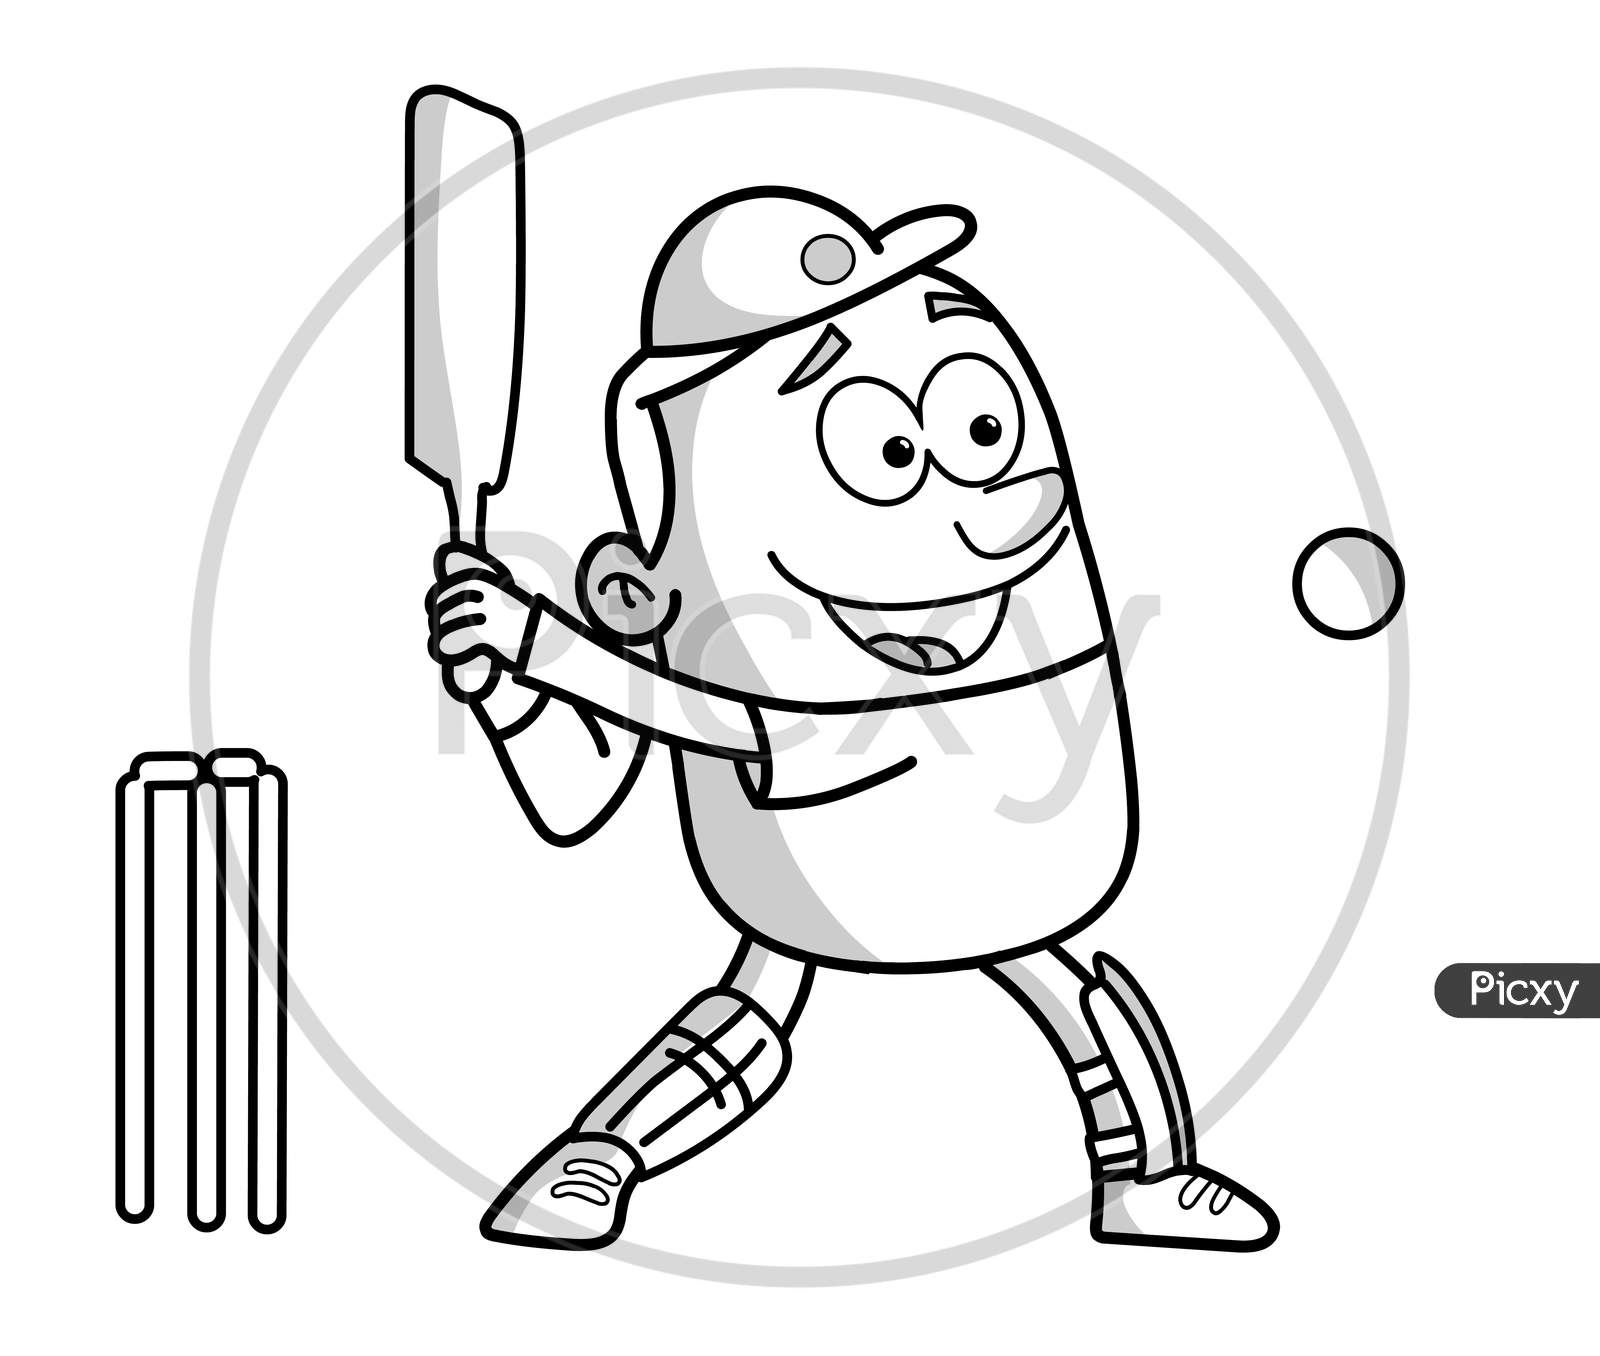 Cricket player with bat sketch | Stock vector | Colourbox